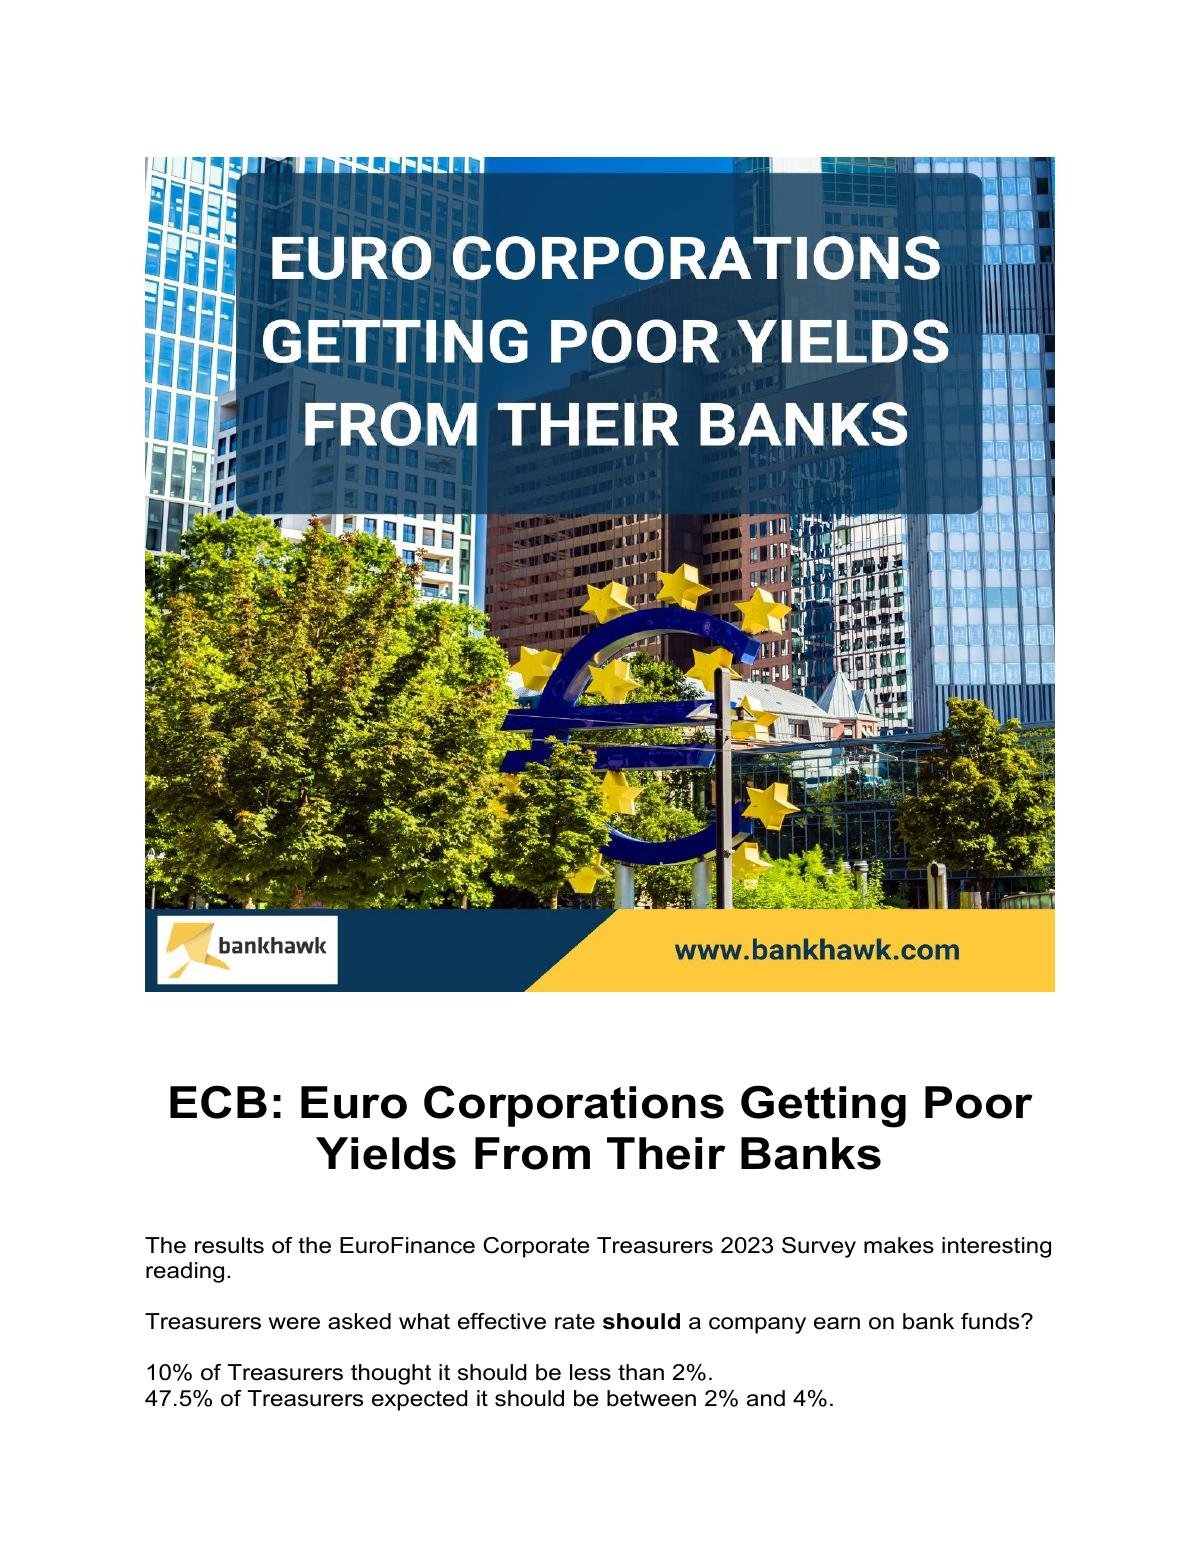 ECB: Euro Corporations Getting Poor Yields From Their Banks